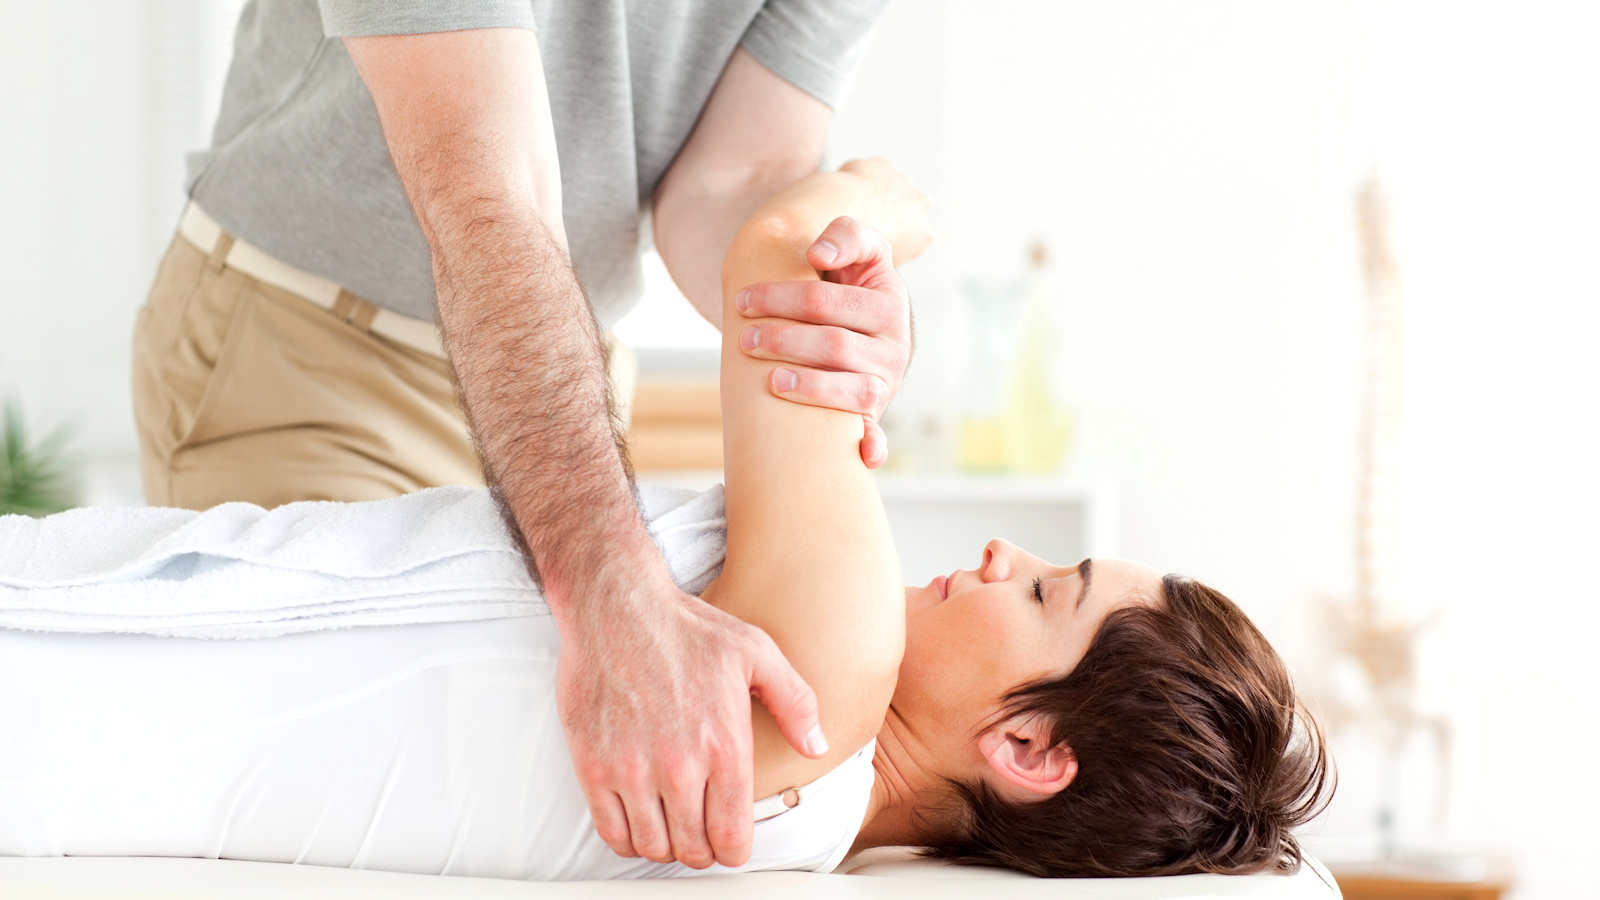 The Joint Chiropractic of Lakewood